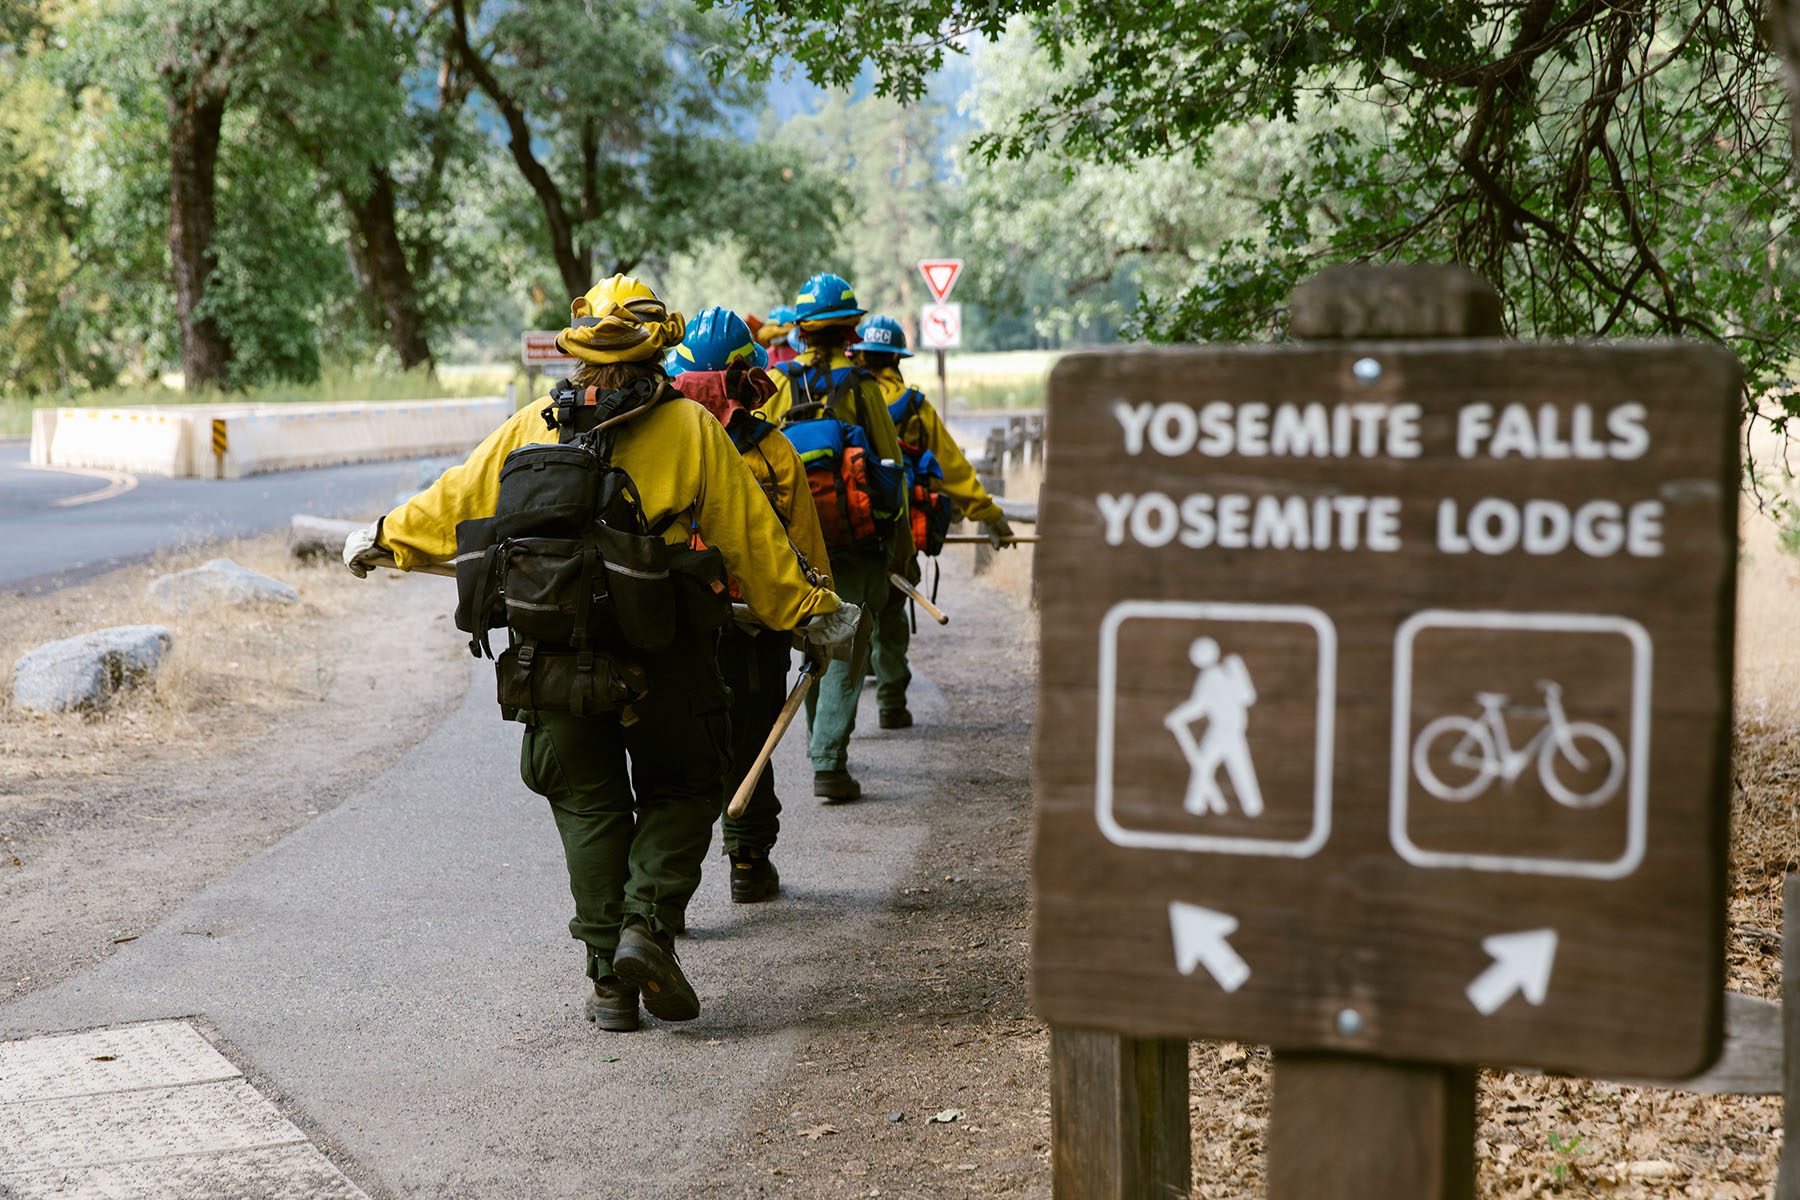 Yosemite’s all-women wildland fire crew walk in unison to their burn pile project in Yosemite National Park.